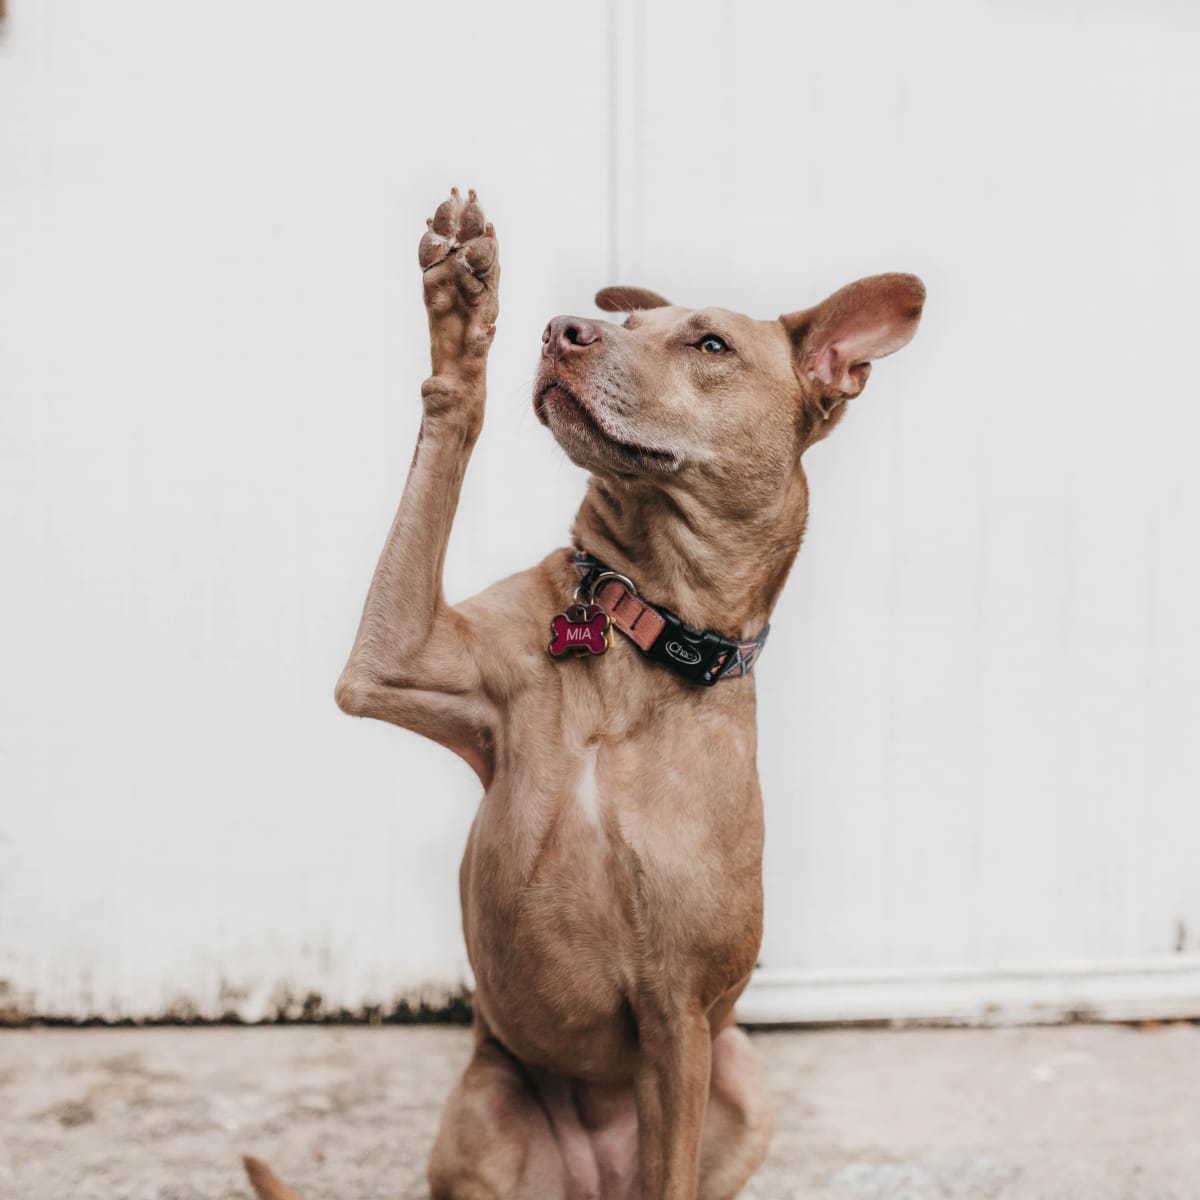 WestVet Idaho Falls - Ouch! Broken toenails can happen to our furry  friends, too! Whether it's a snag on the carpet or an unfortunate landing,  dogs can experience bleeding or broken nails